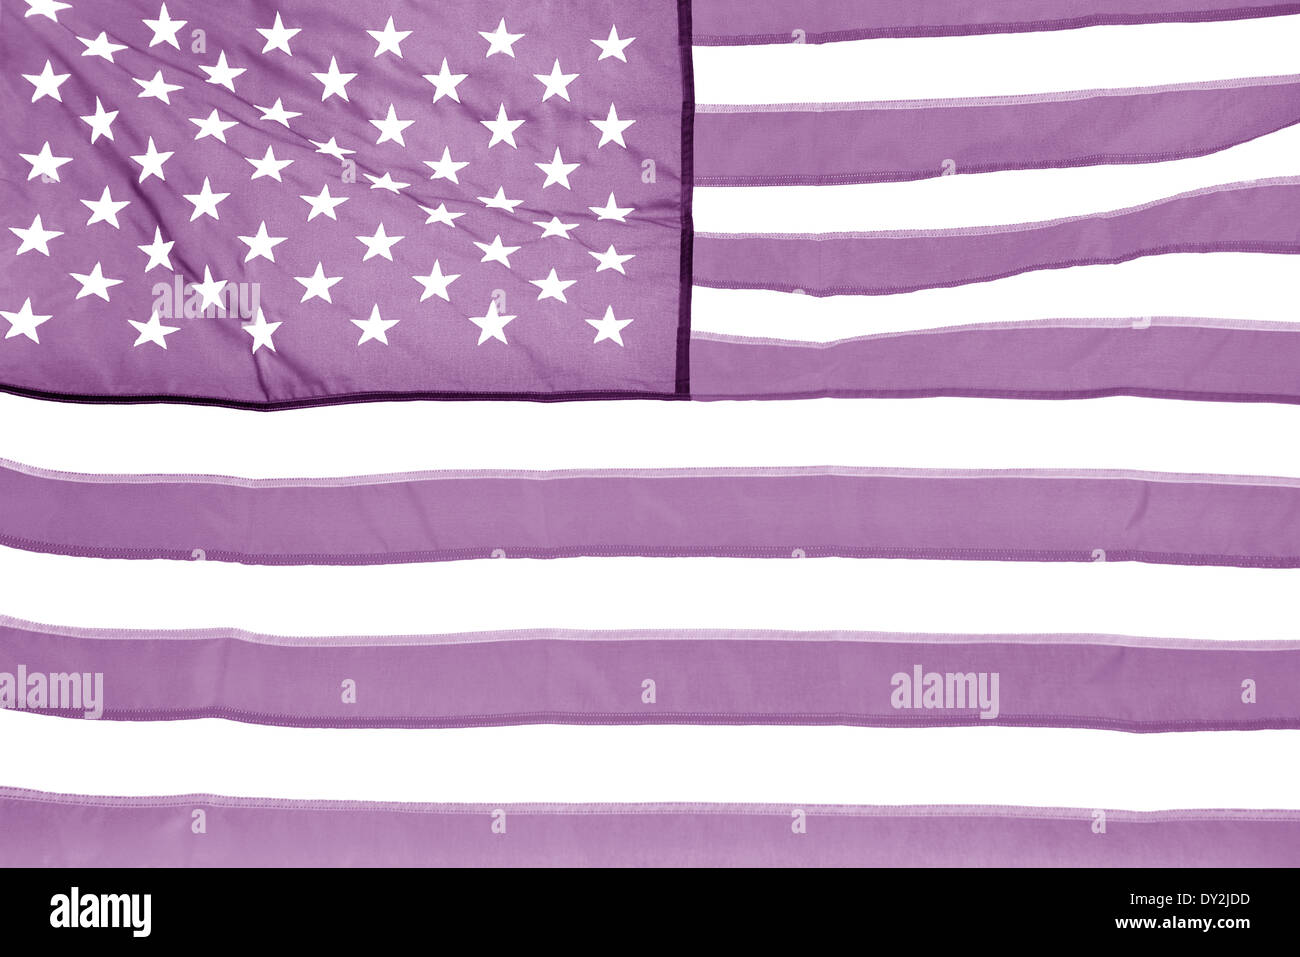 The national flag of the United States of America lilac version. Stock Photo